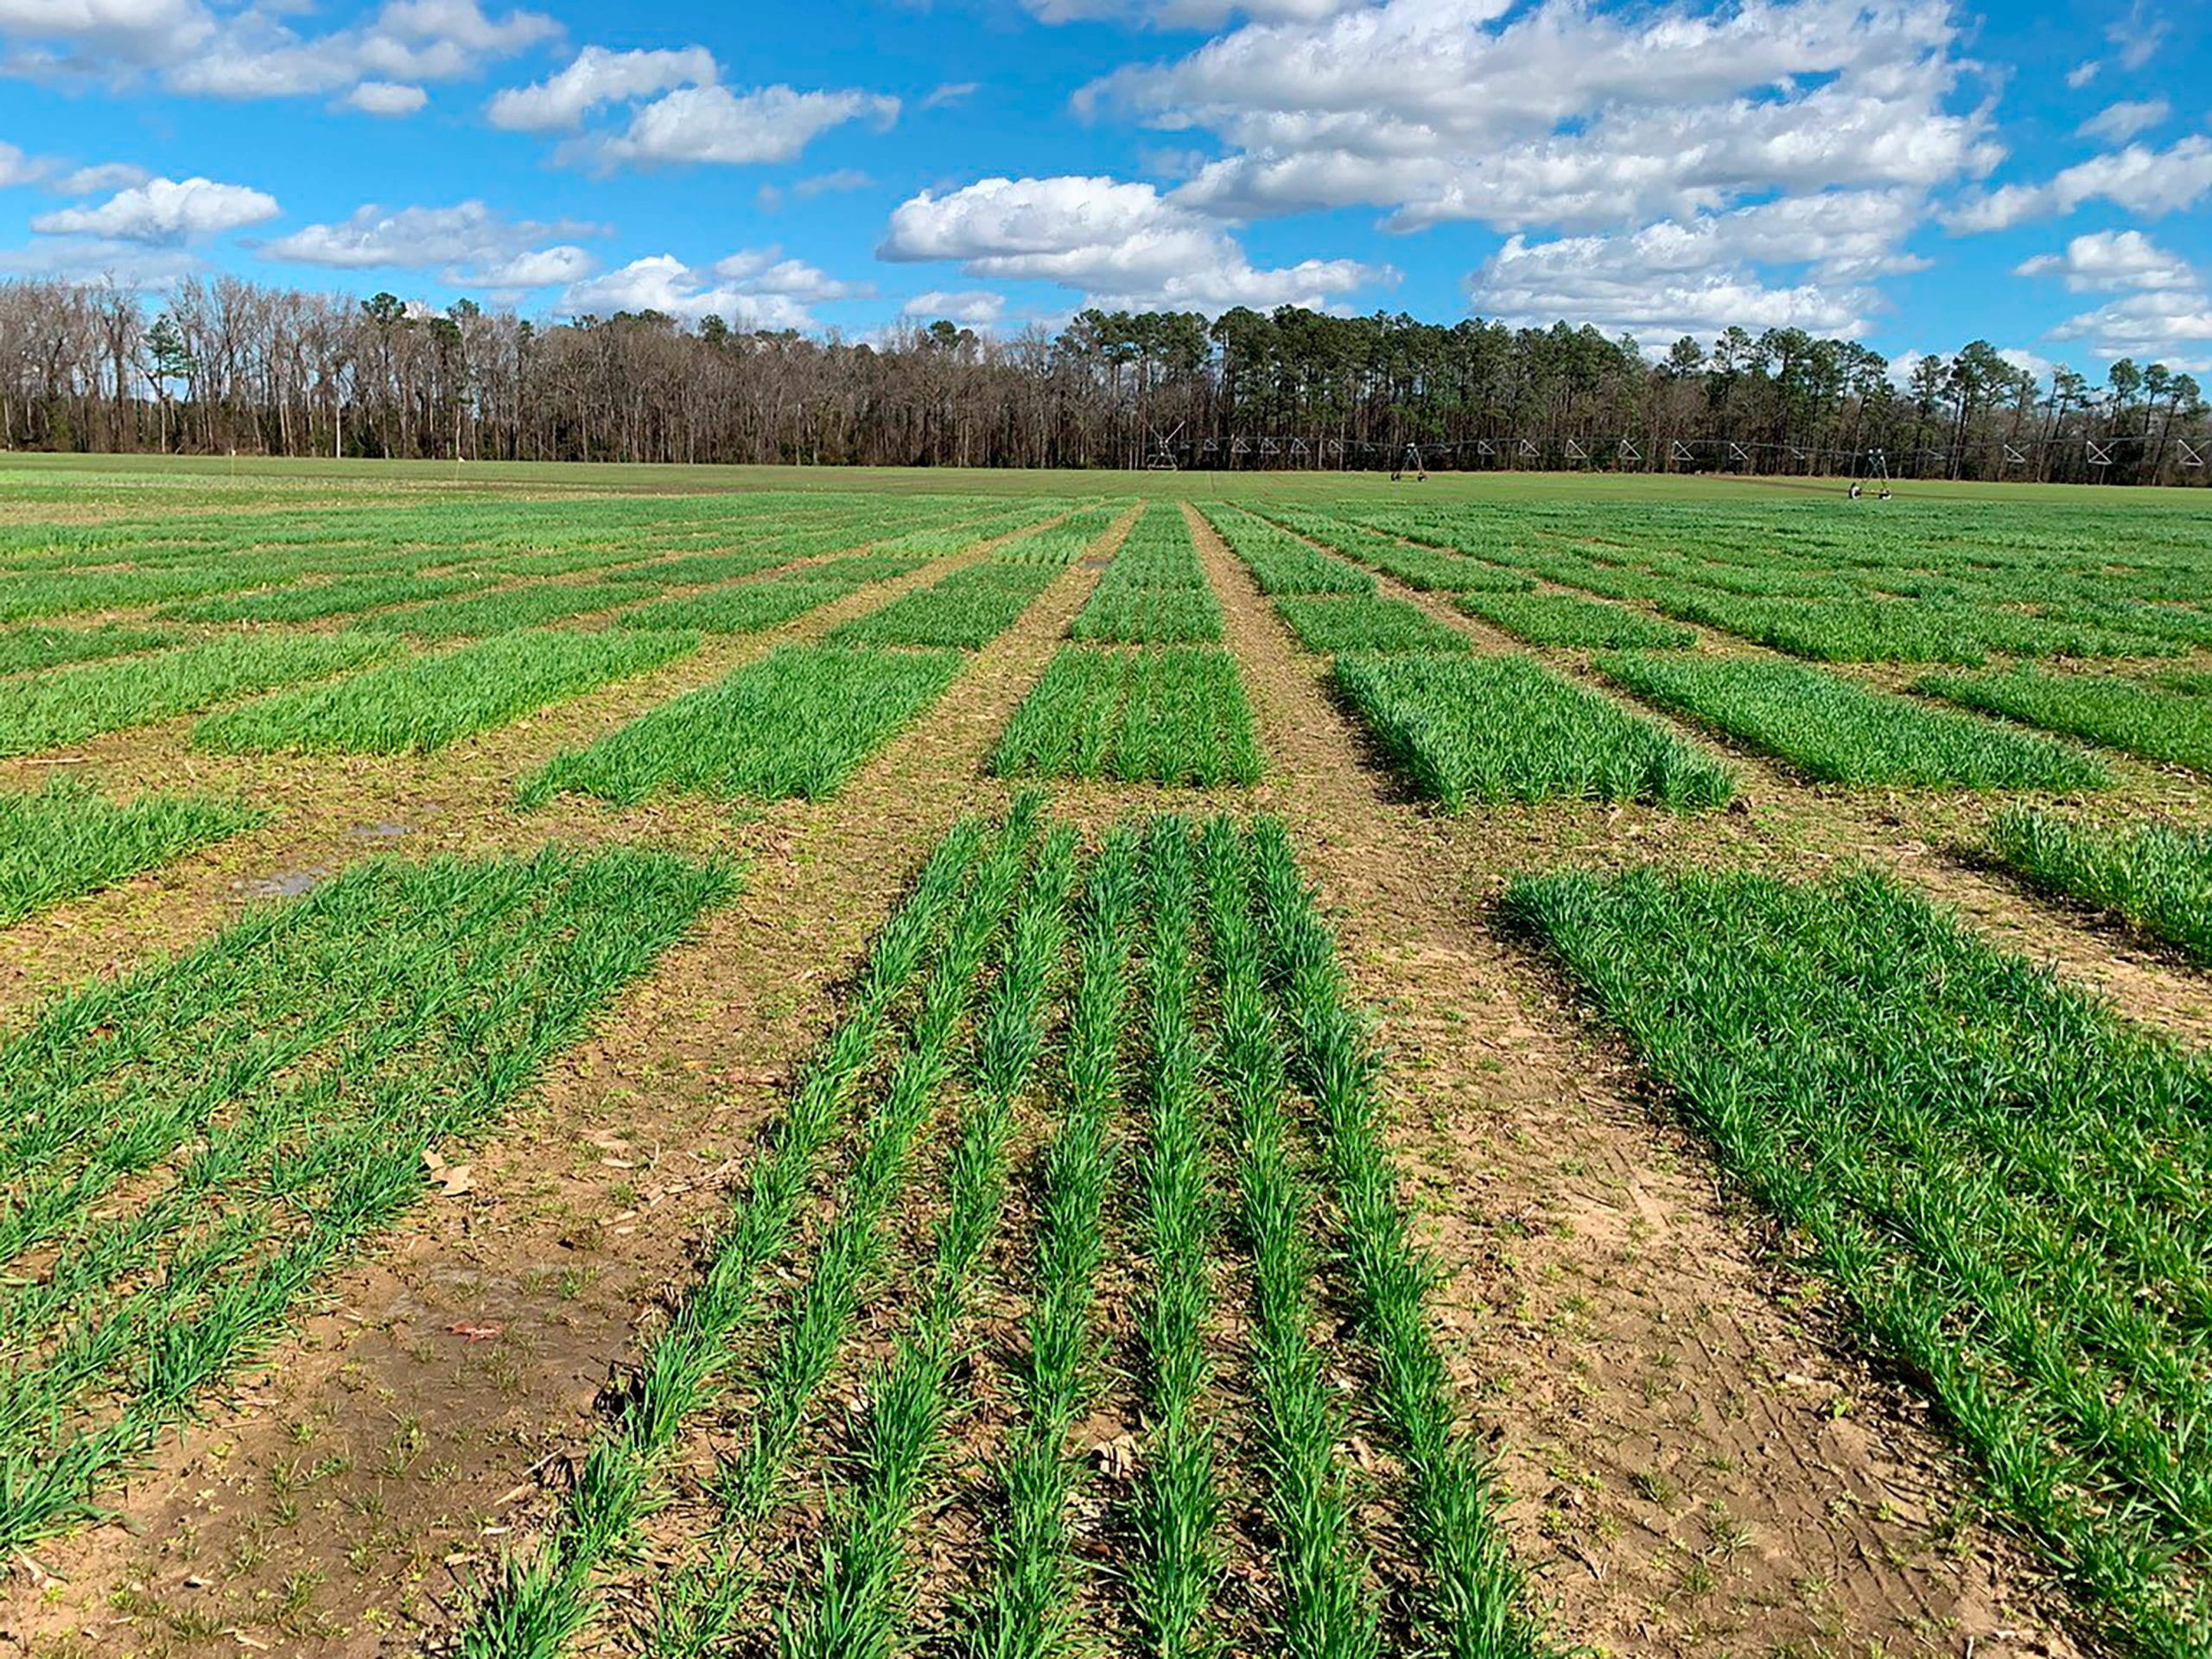 Clemson University researcher Rick Boyles is working to determine how to develop new wheat lines that withstand environmental changes and produce under tough conditions.